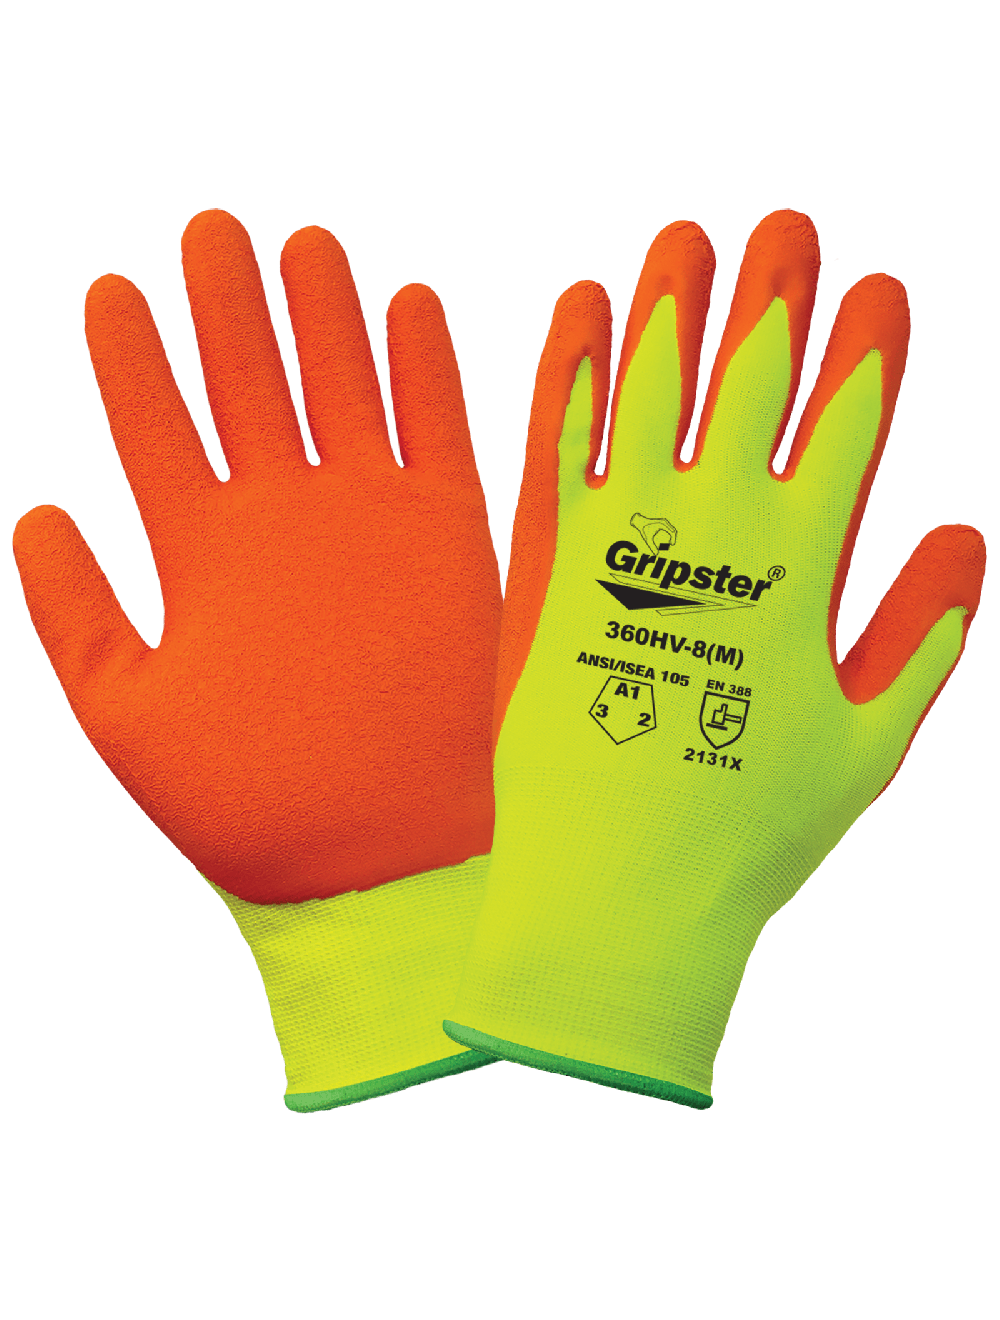 Global Glove and Safety Hand Protection, Eye Protection, Cooling